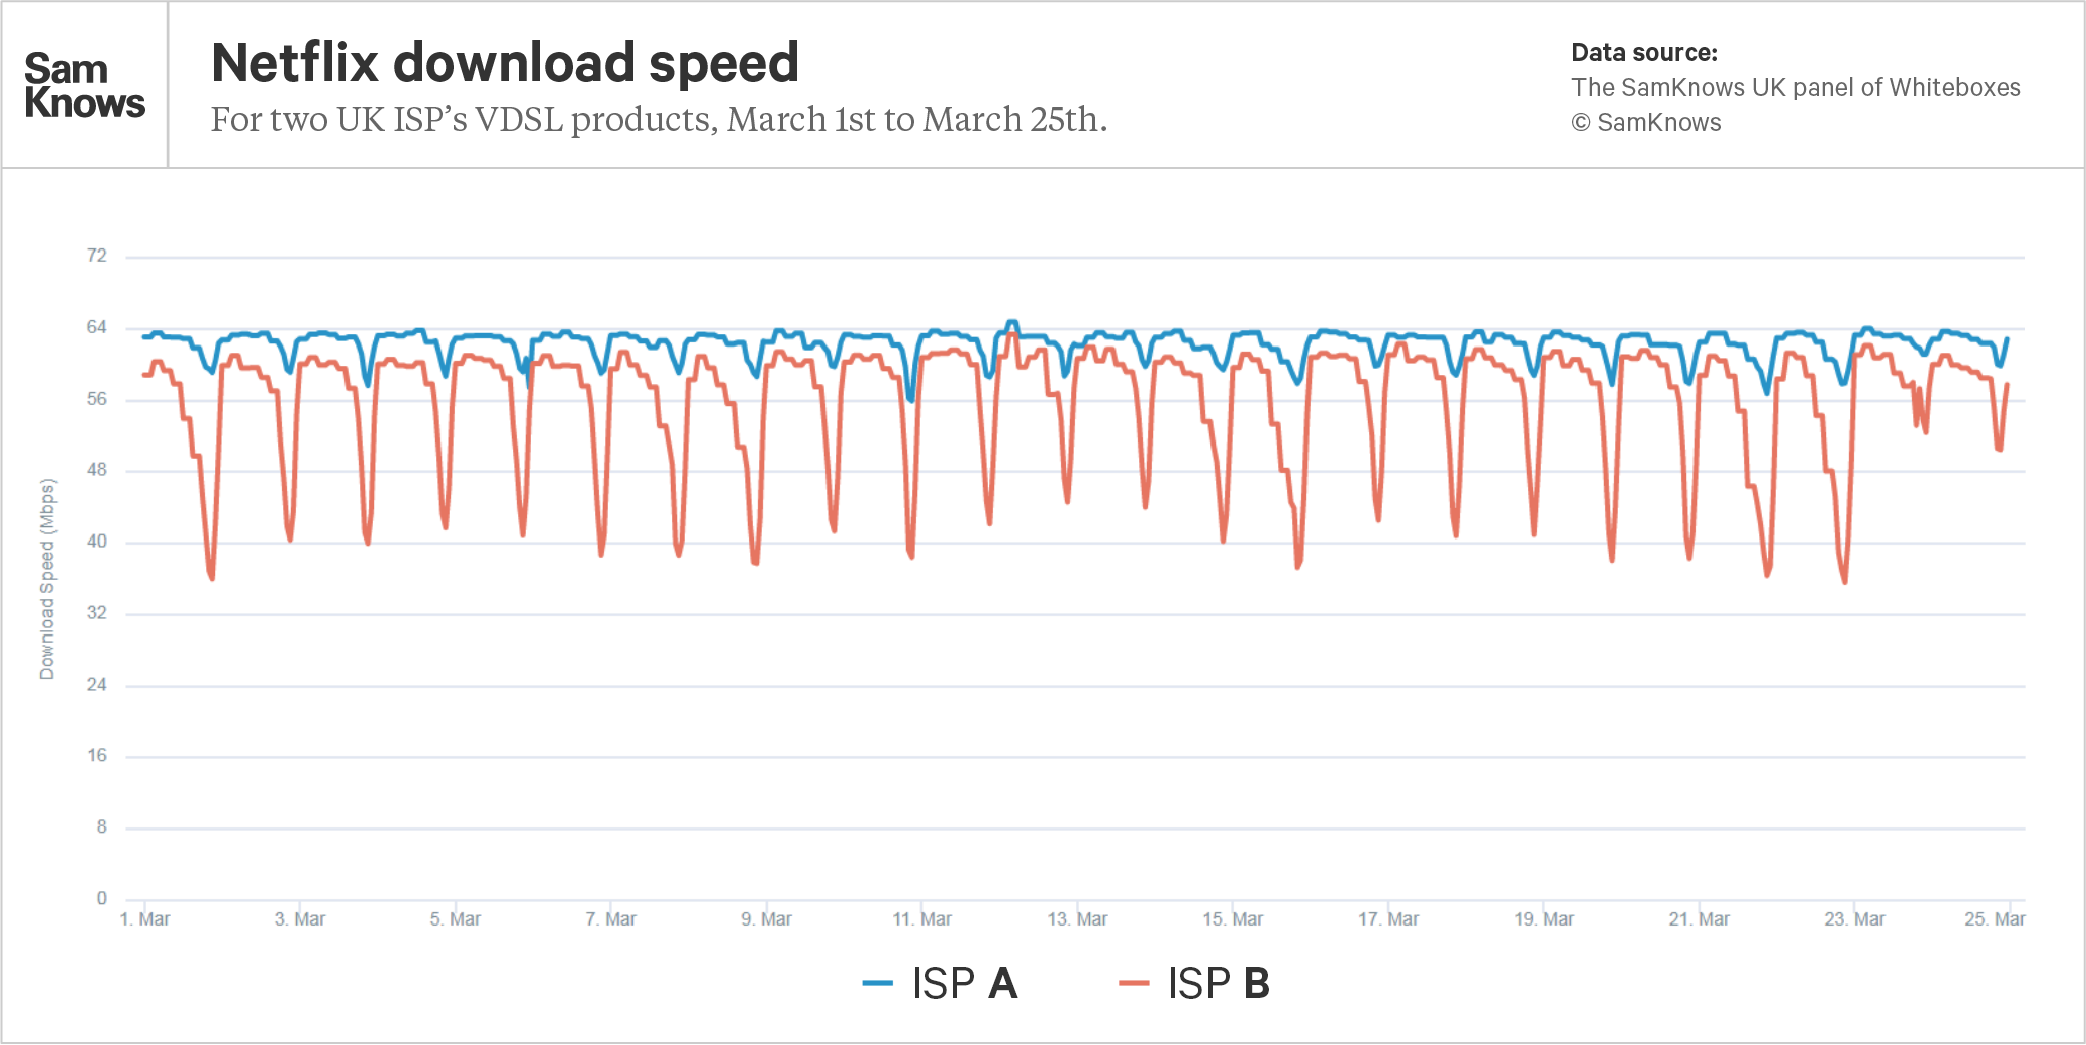 Netflix download speed for two ISPs' VDSL products, March 1st to March 25th.